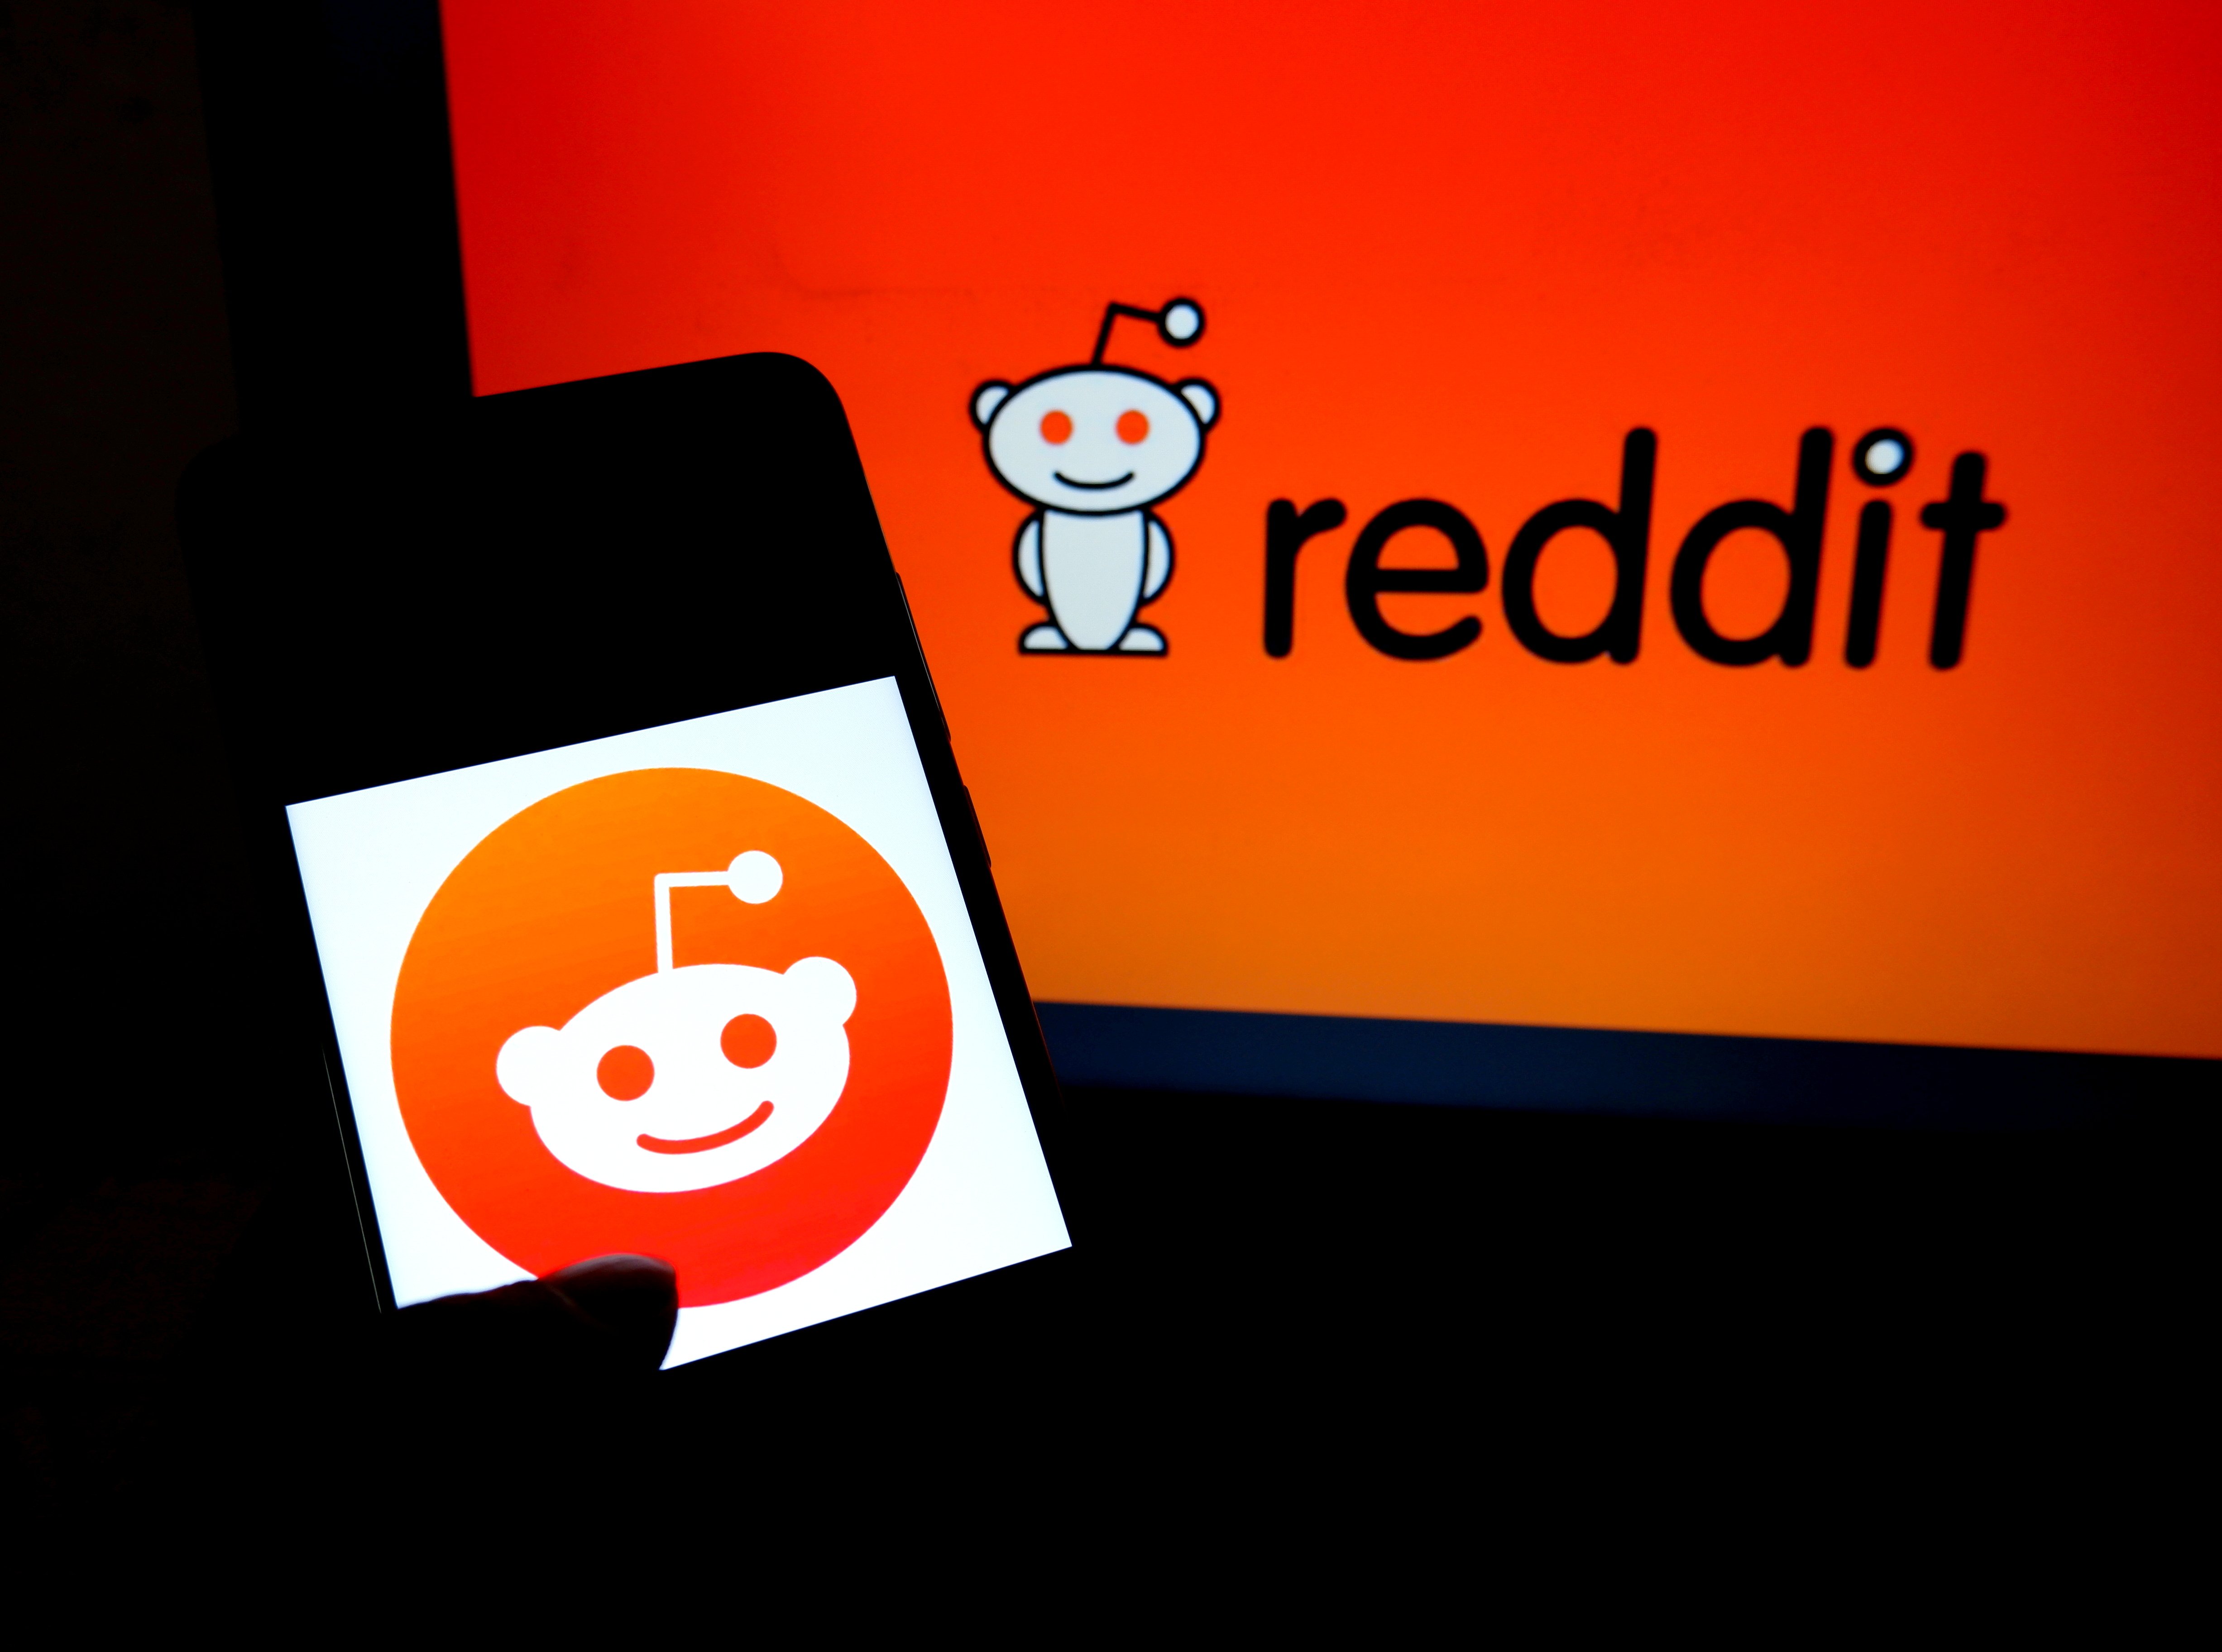 The logo of social news aggregate, Reddit, is seen on a computer and a smartphone